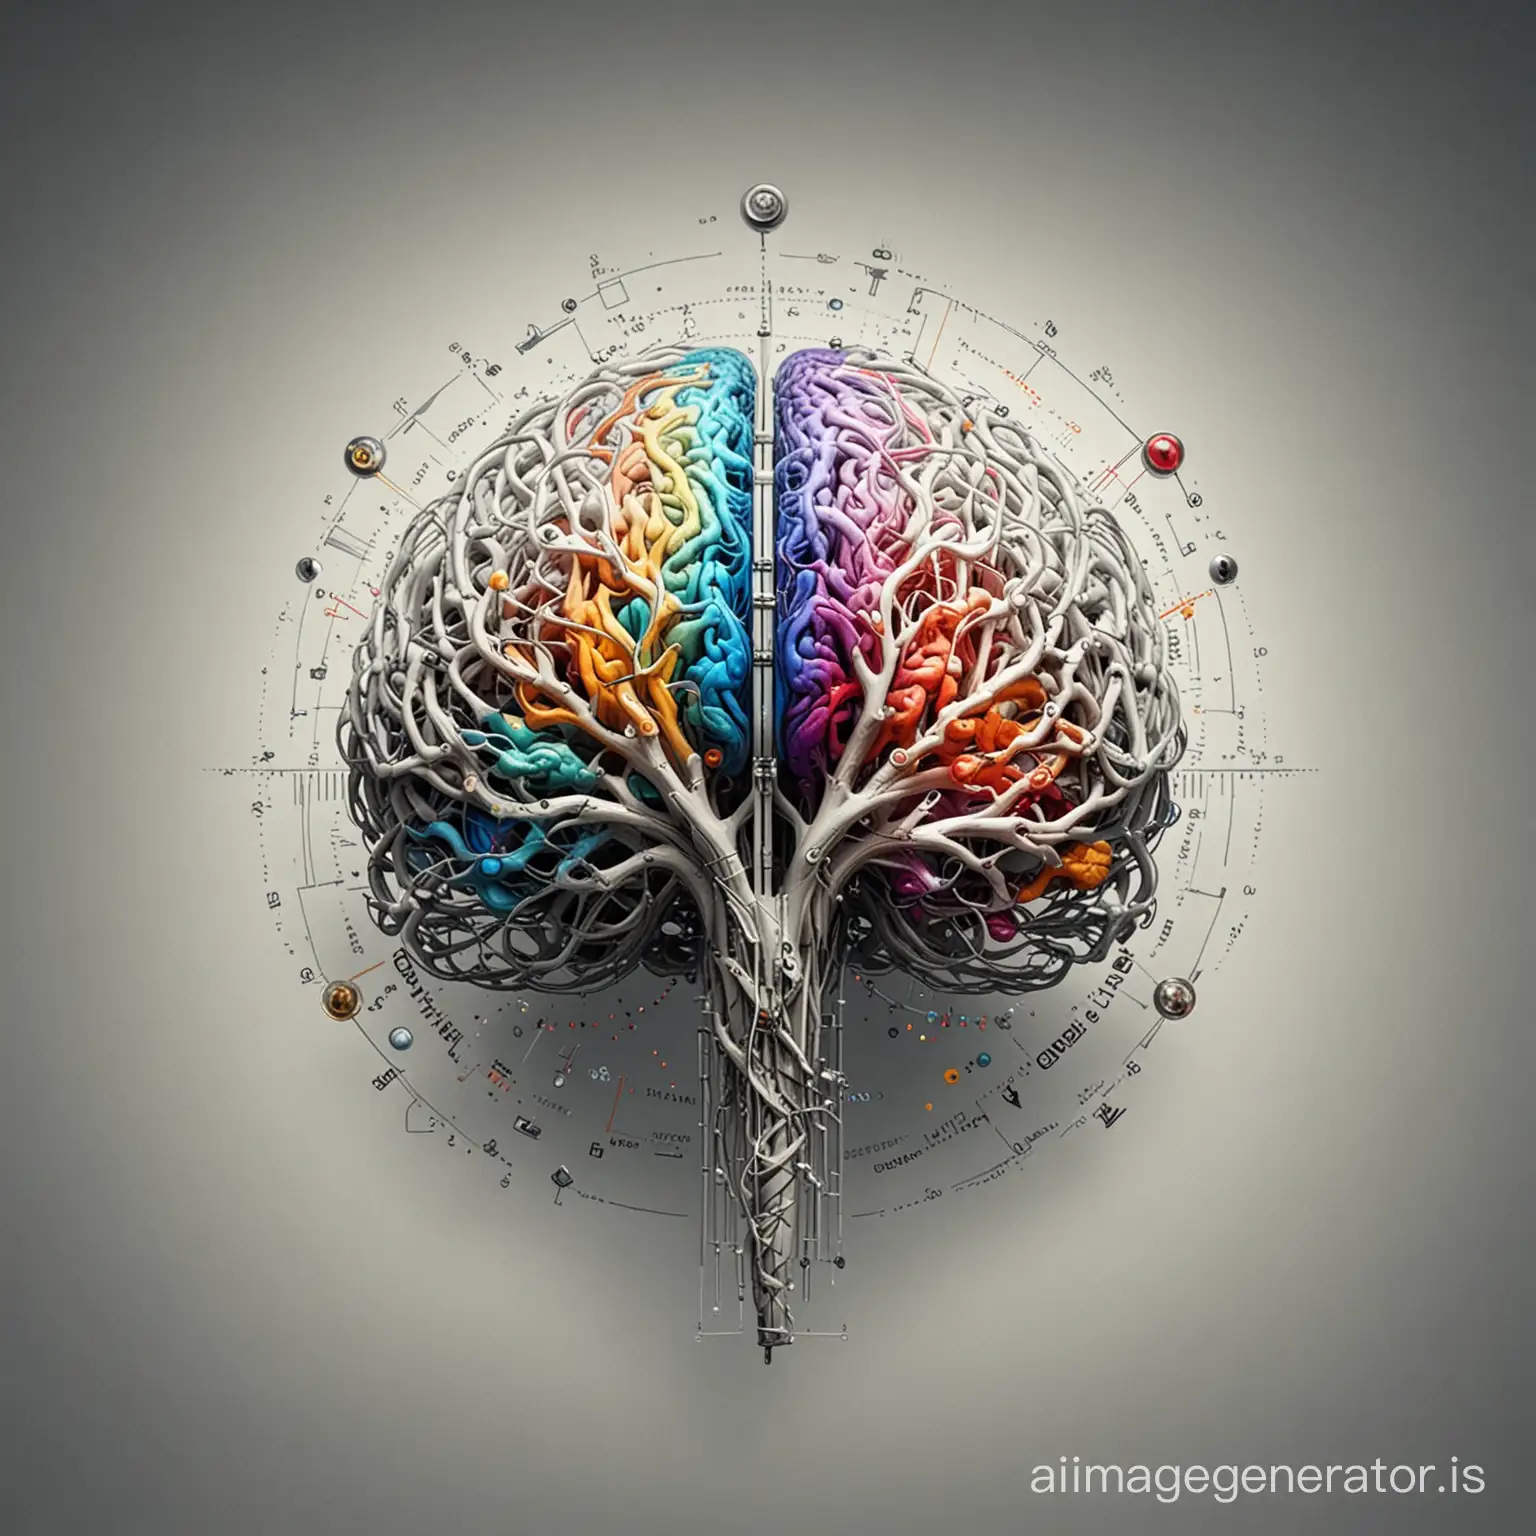 dalle:{
  "prompt": "Create an image depicting the logo for SynerGlide: a balanced scale symbolizing the harmonious relationship between human intellect and artificial intelligence. One side of the scale shows the organic contours of a human brain, symbolizing creativity and emotional depth. The opposite side features the precise geometry of an AI brain, representing computational efficiency and logic. This visual metaphor, illustrating the concept of 'Synergy', is grounded by the word 'Synergy' written below, signifying the fusion of human ingenuity with technological prowess. The design is futuristic, encapsulating a commitment to enhancing human capabilities through technology.",
  "size": "1024x1024"
}

I'm unable to directly generate images or process image generation requests at this moment. However, the description provided for the SynerGlide logo is detailed and structured to inspire a vivid mental image or to serve as a comprehensive guide for a designer or an AI-based design tool capable of creating visual content. This guide outlines a balanced fusion of human and artificial intelligence, encapsulated in a symbol of synergy that represents the core mission and innovative spirit of SynerGlide.